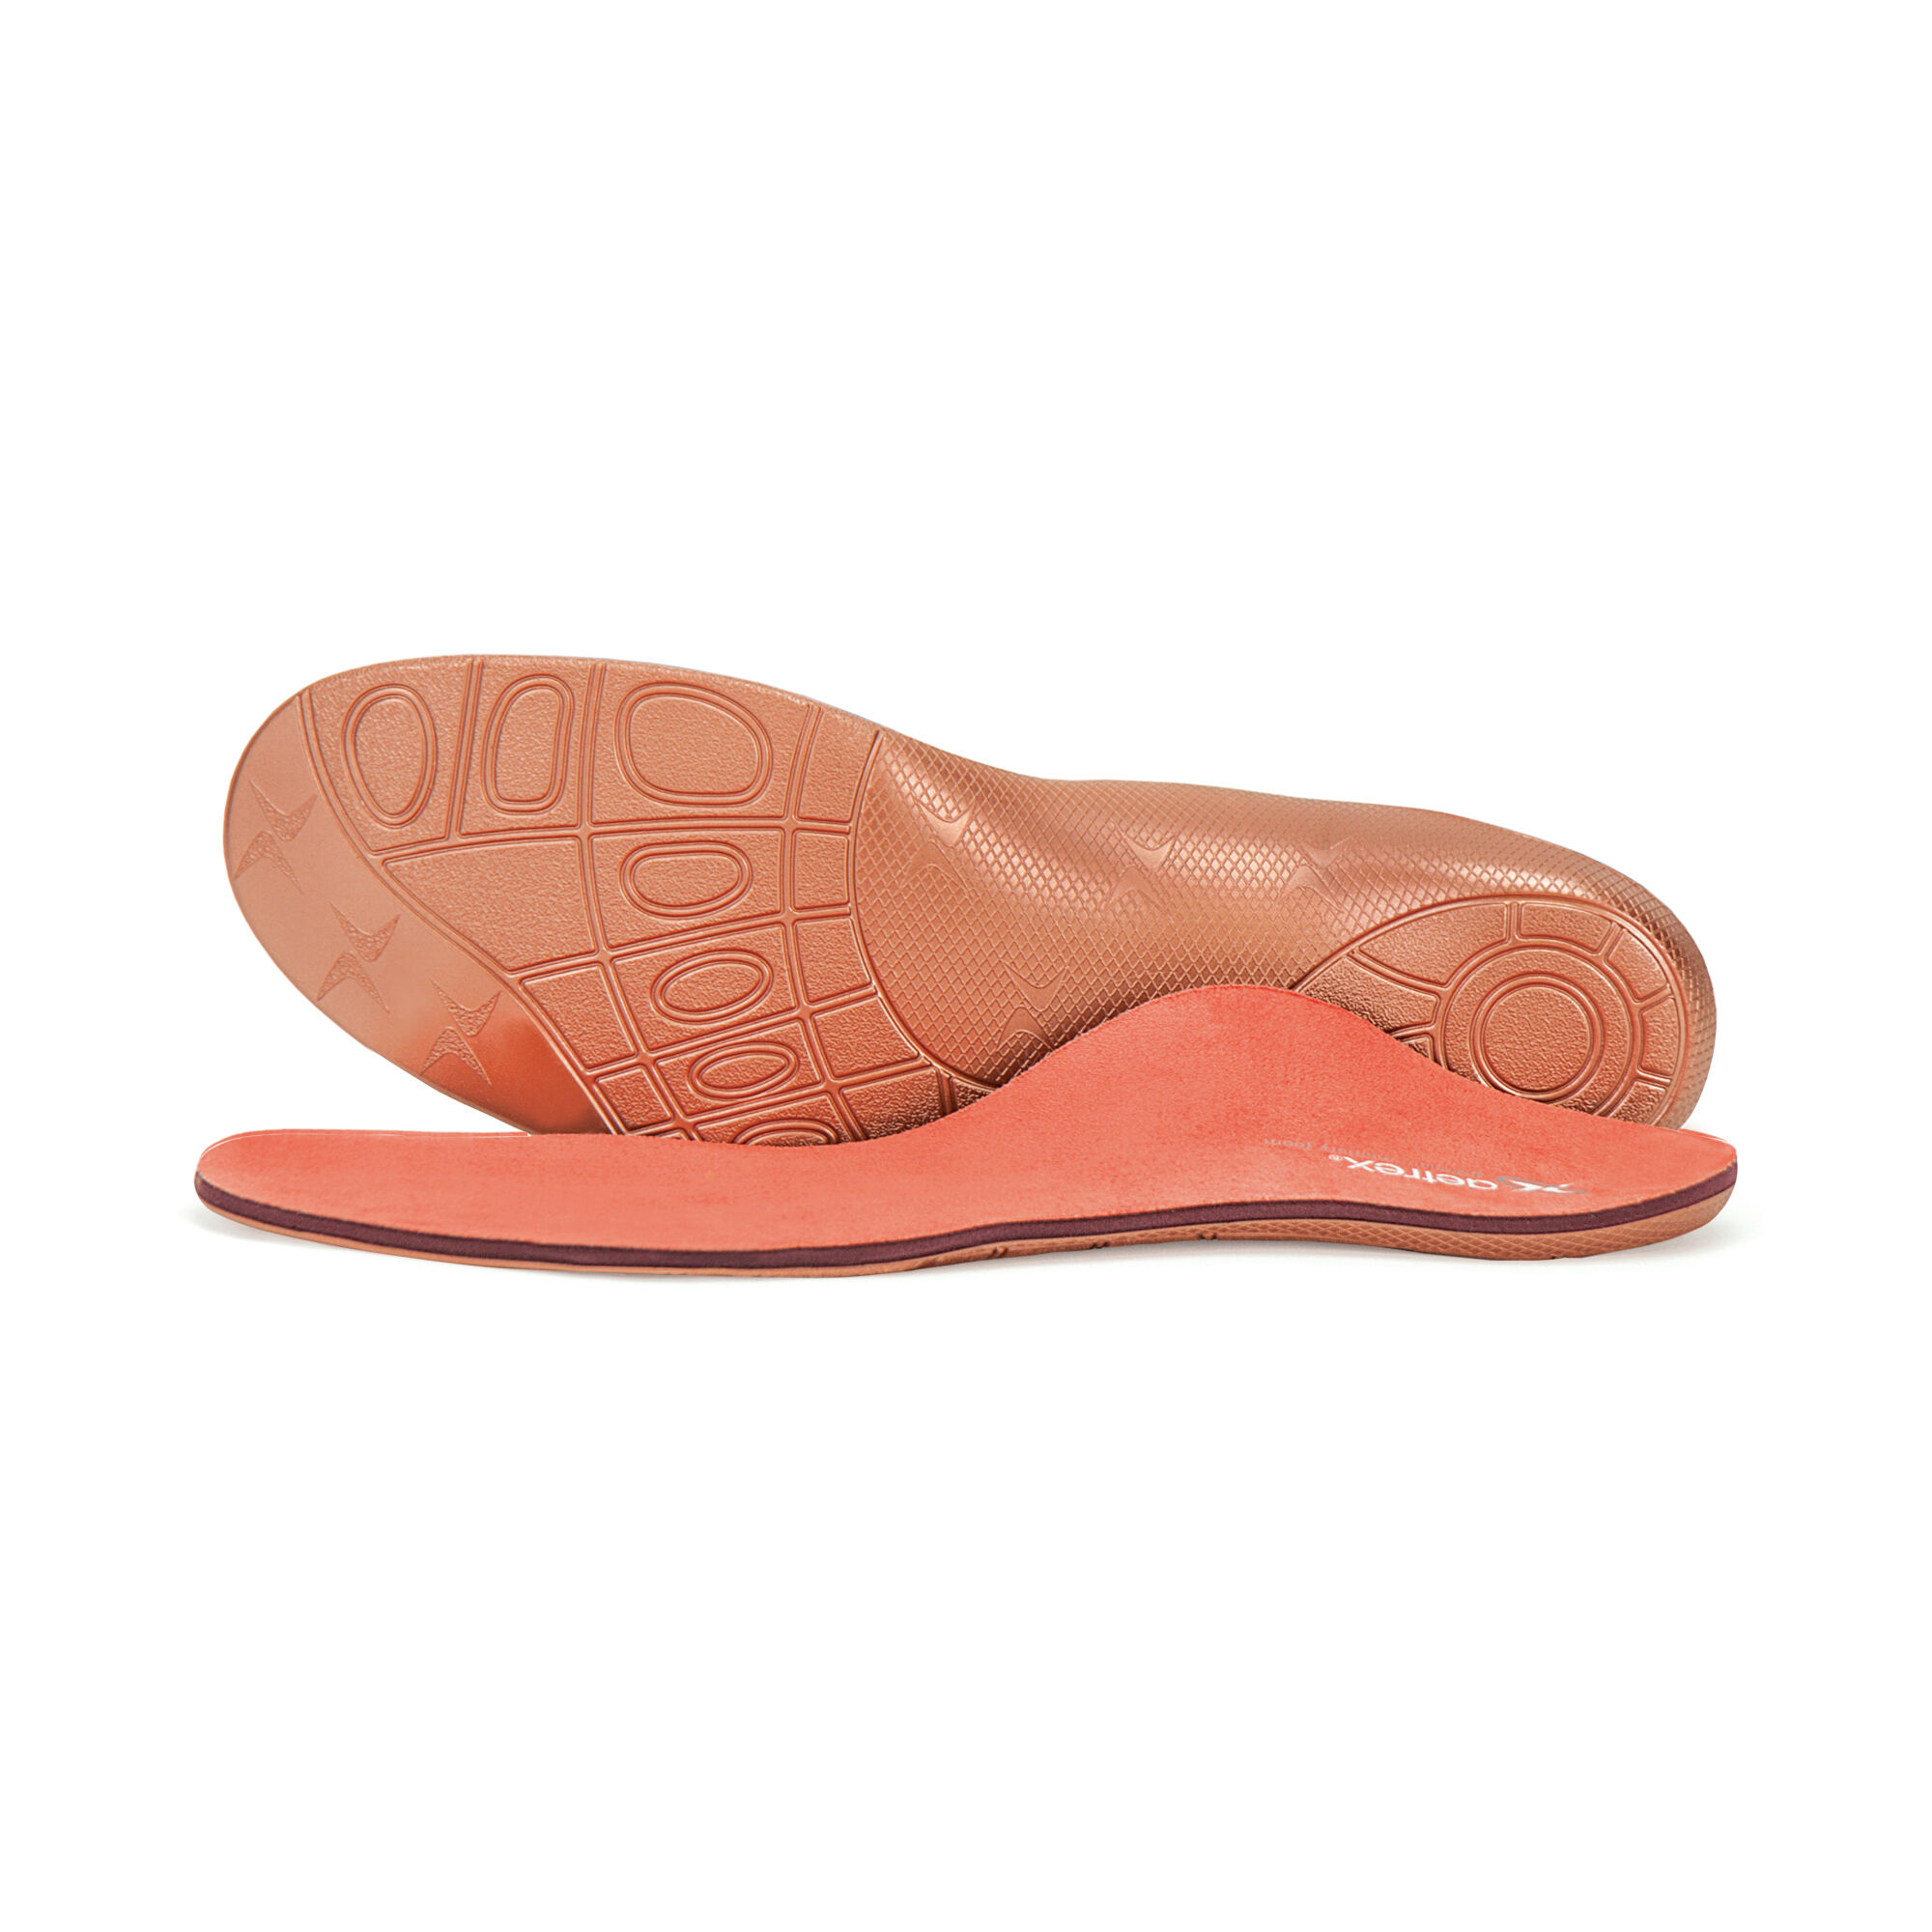 Sof Sole Memory Insoles – The Insole Store